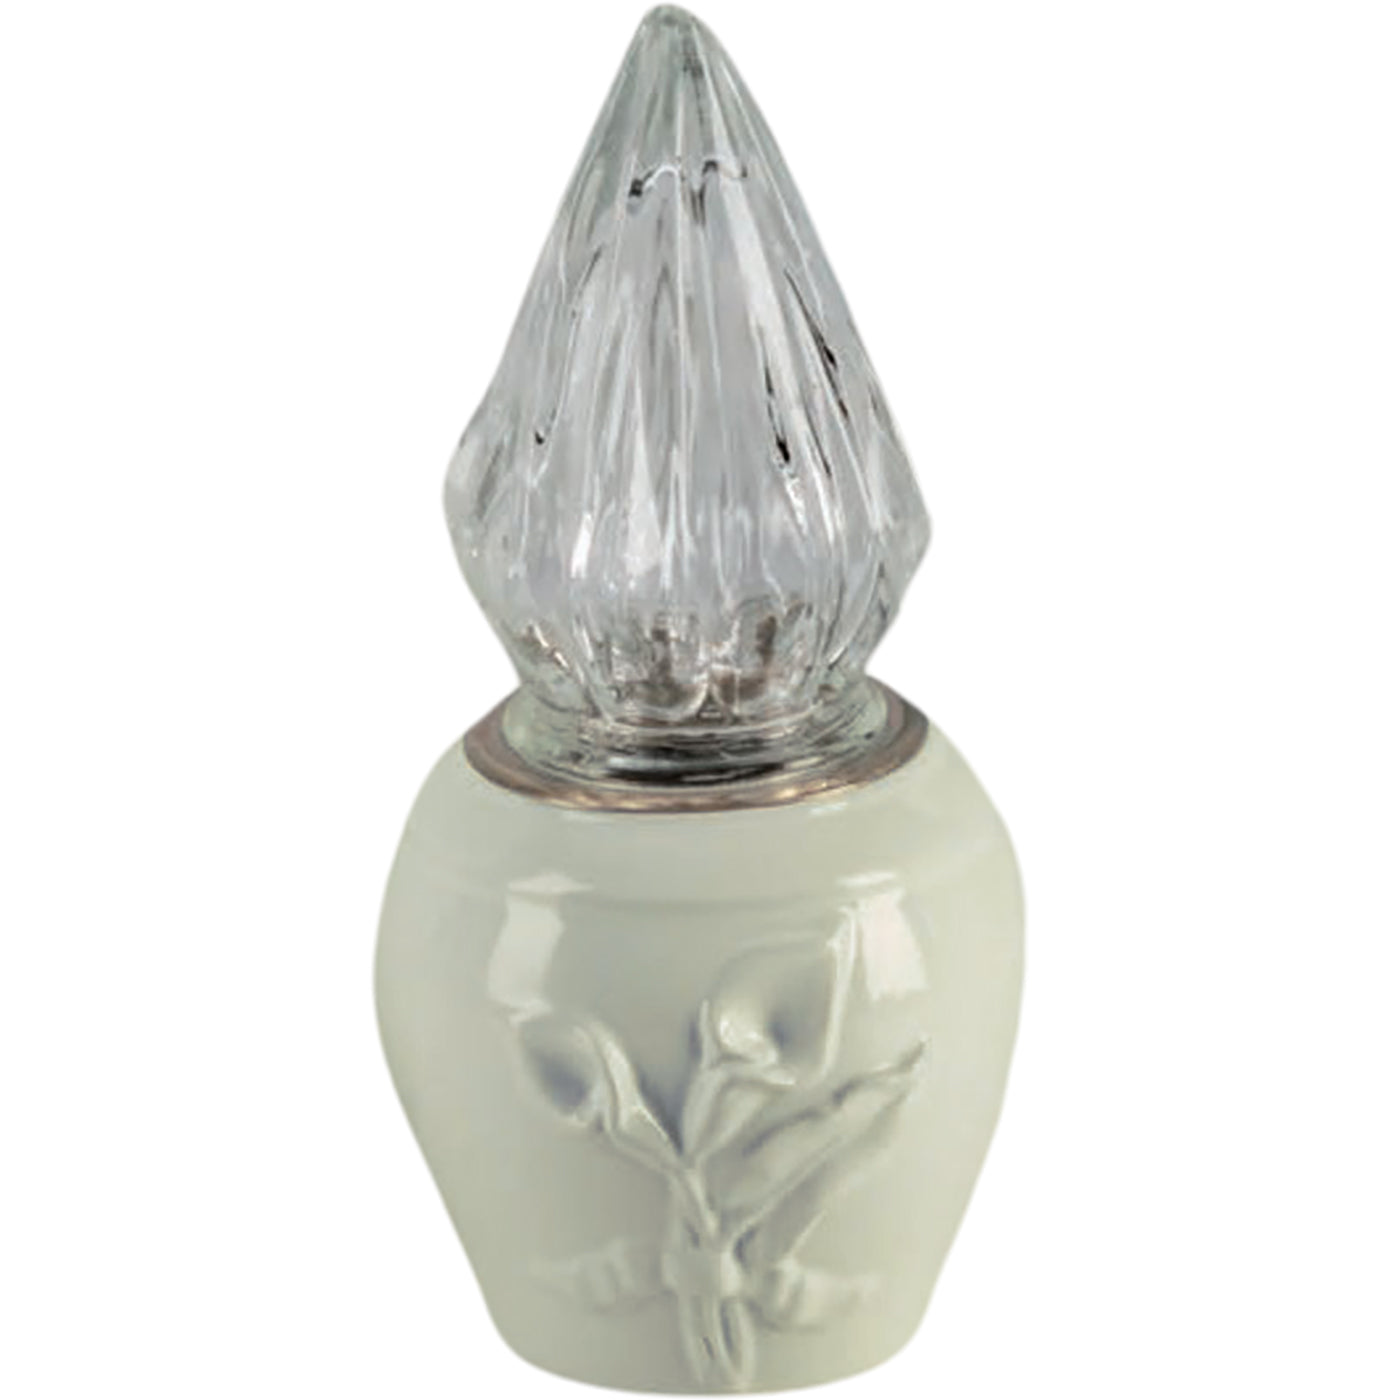 Grave light Calla ivory 10x10cm - 3.9x3.9in In ivory porcelain, wall attached CAL164P/A